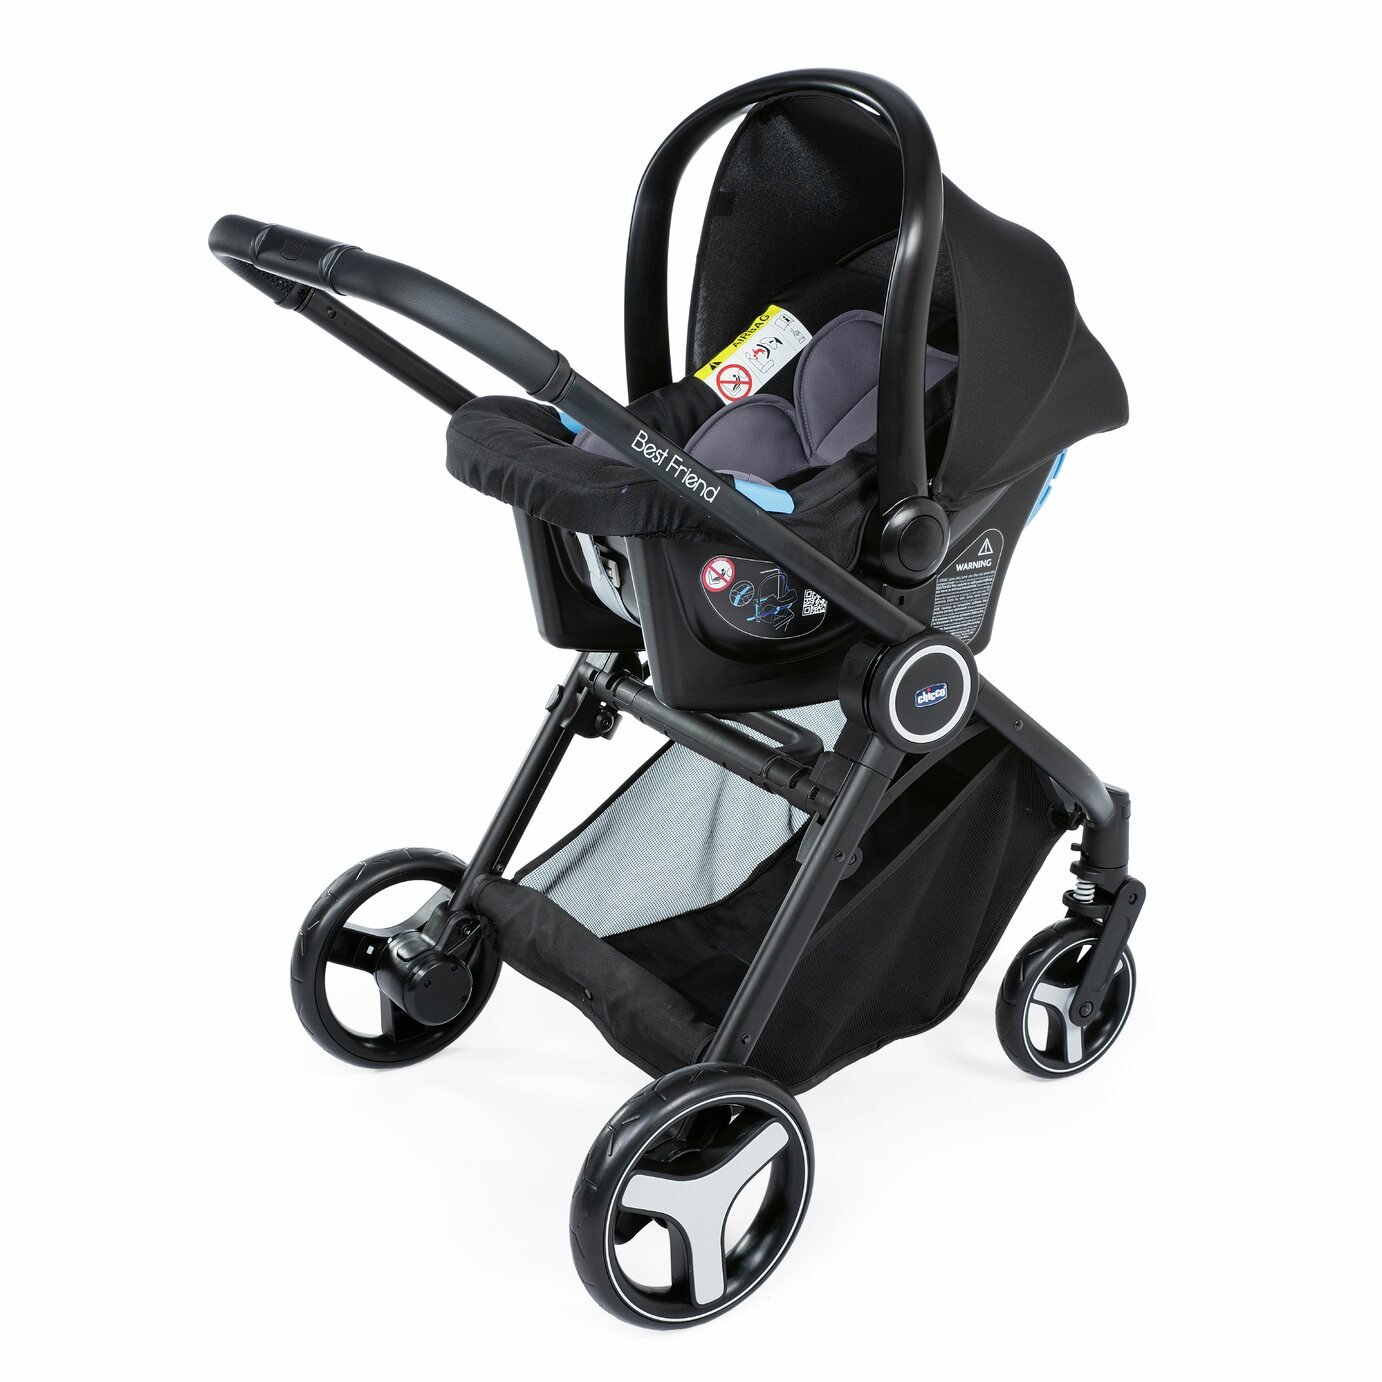 Chicco Trio Best Friend Travel System Review